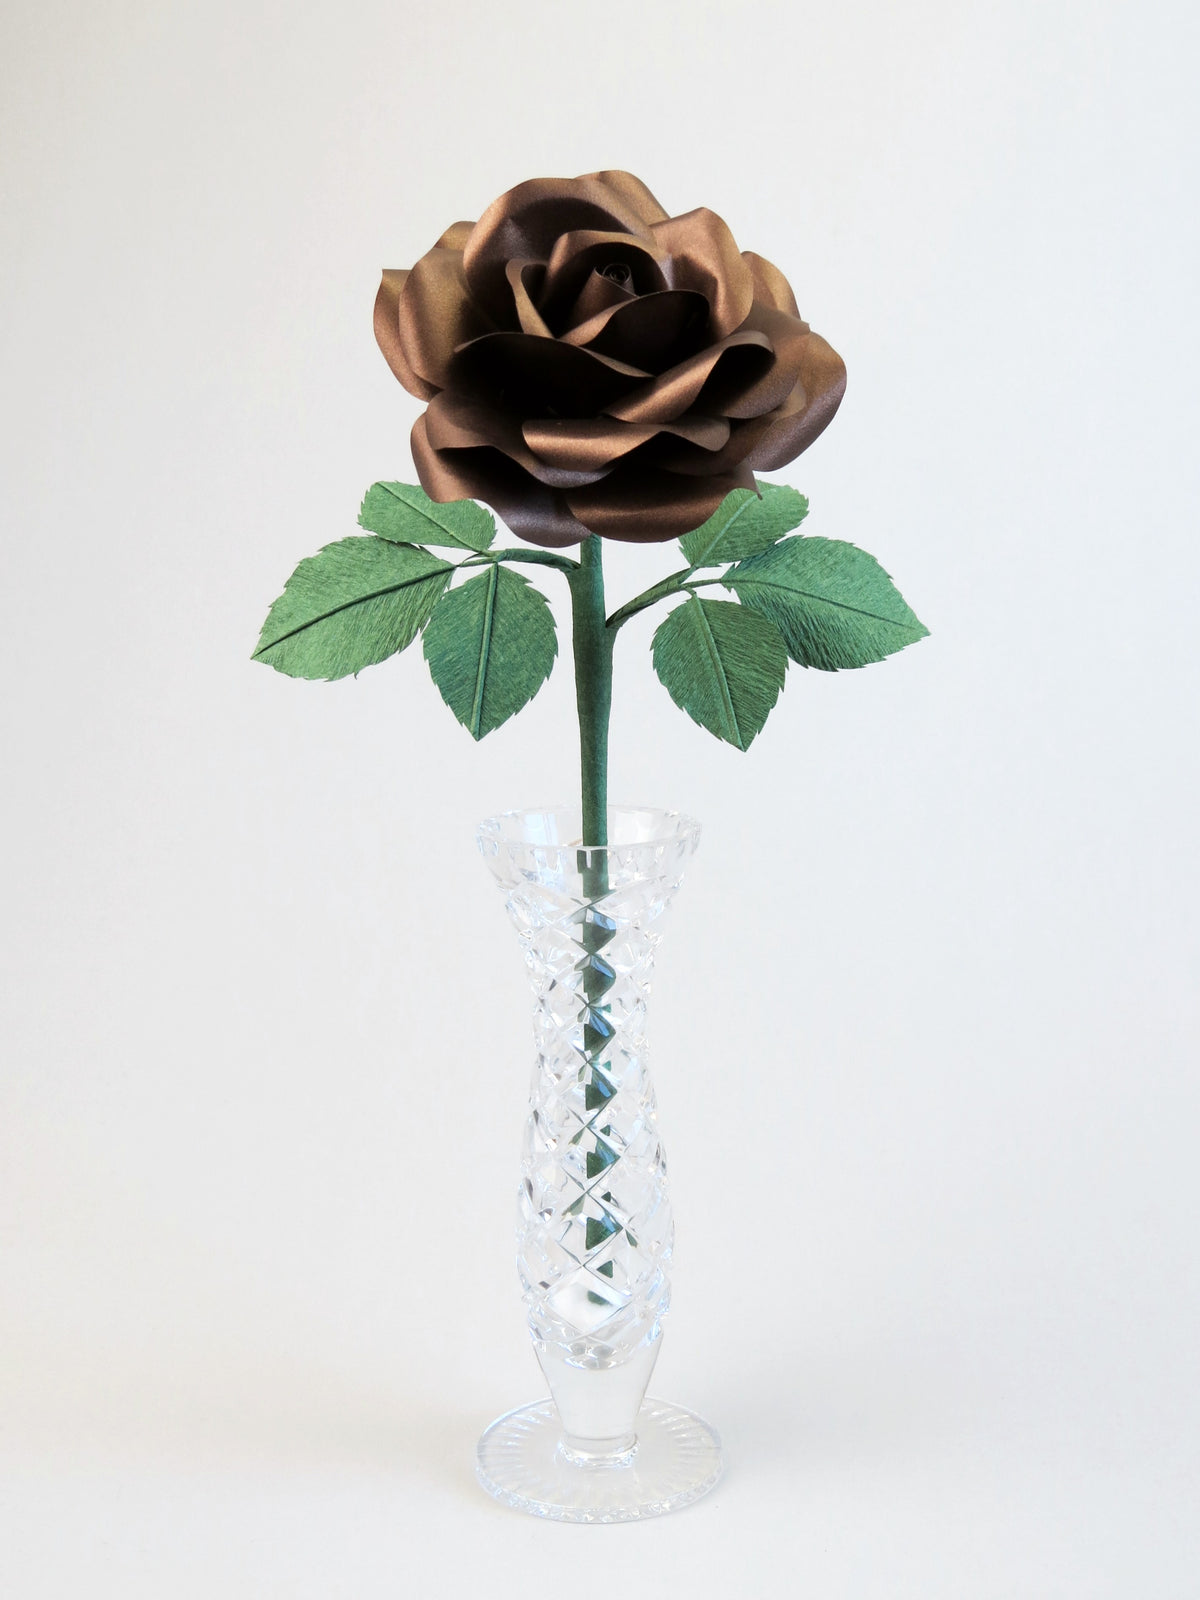 Bronze paper rose with six forest green leaves standing in a narrow glass vase set against a light grey background